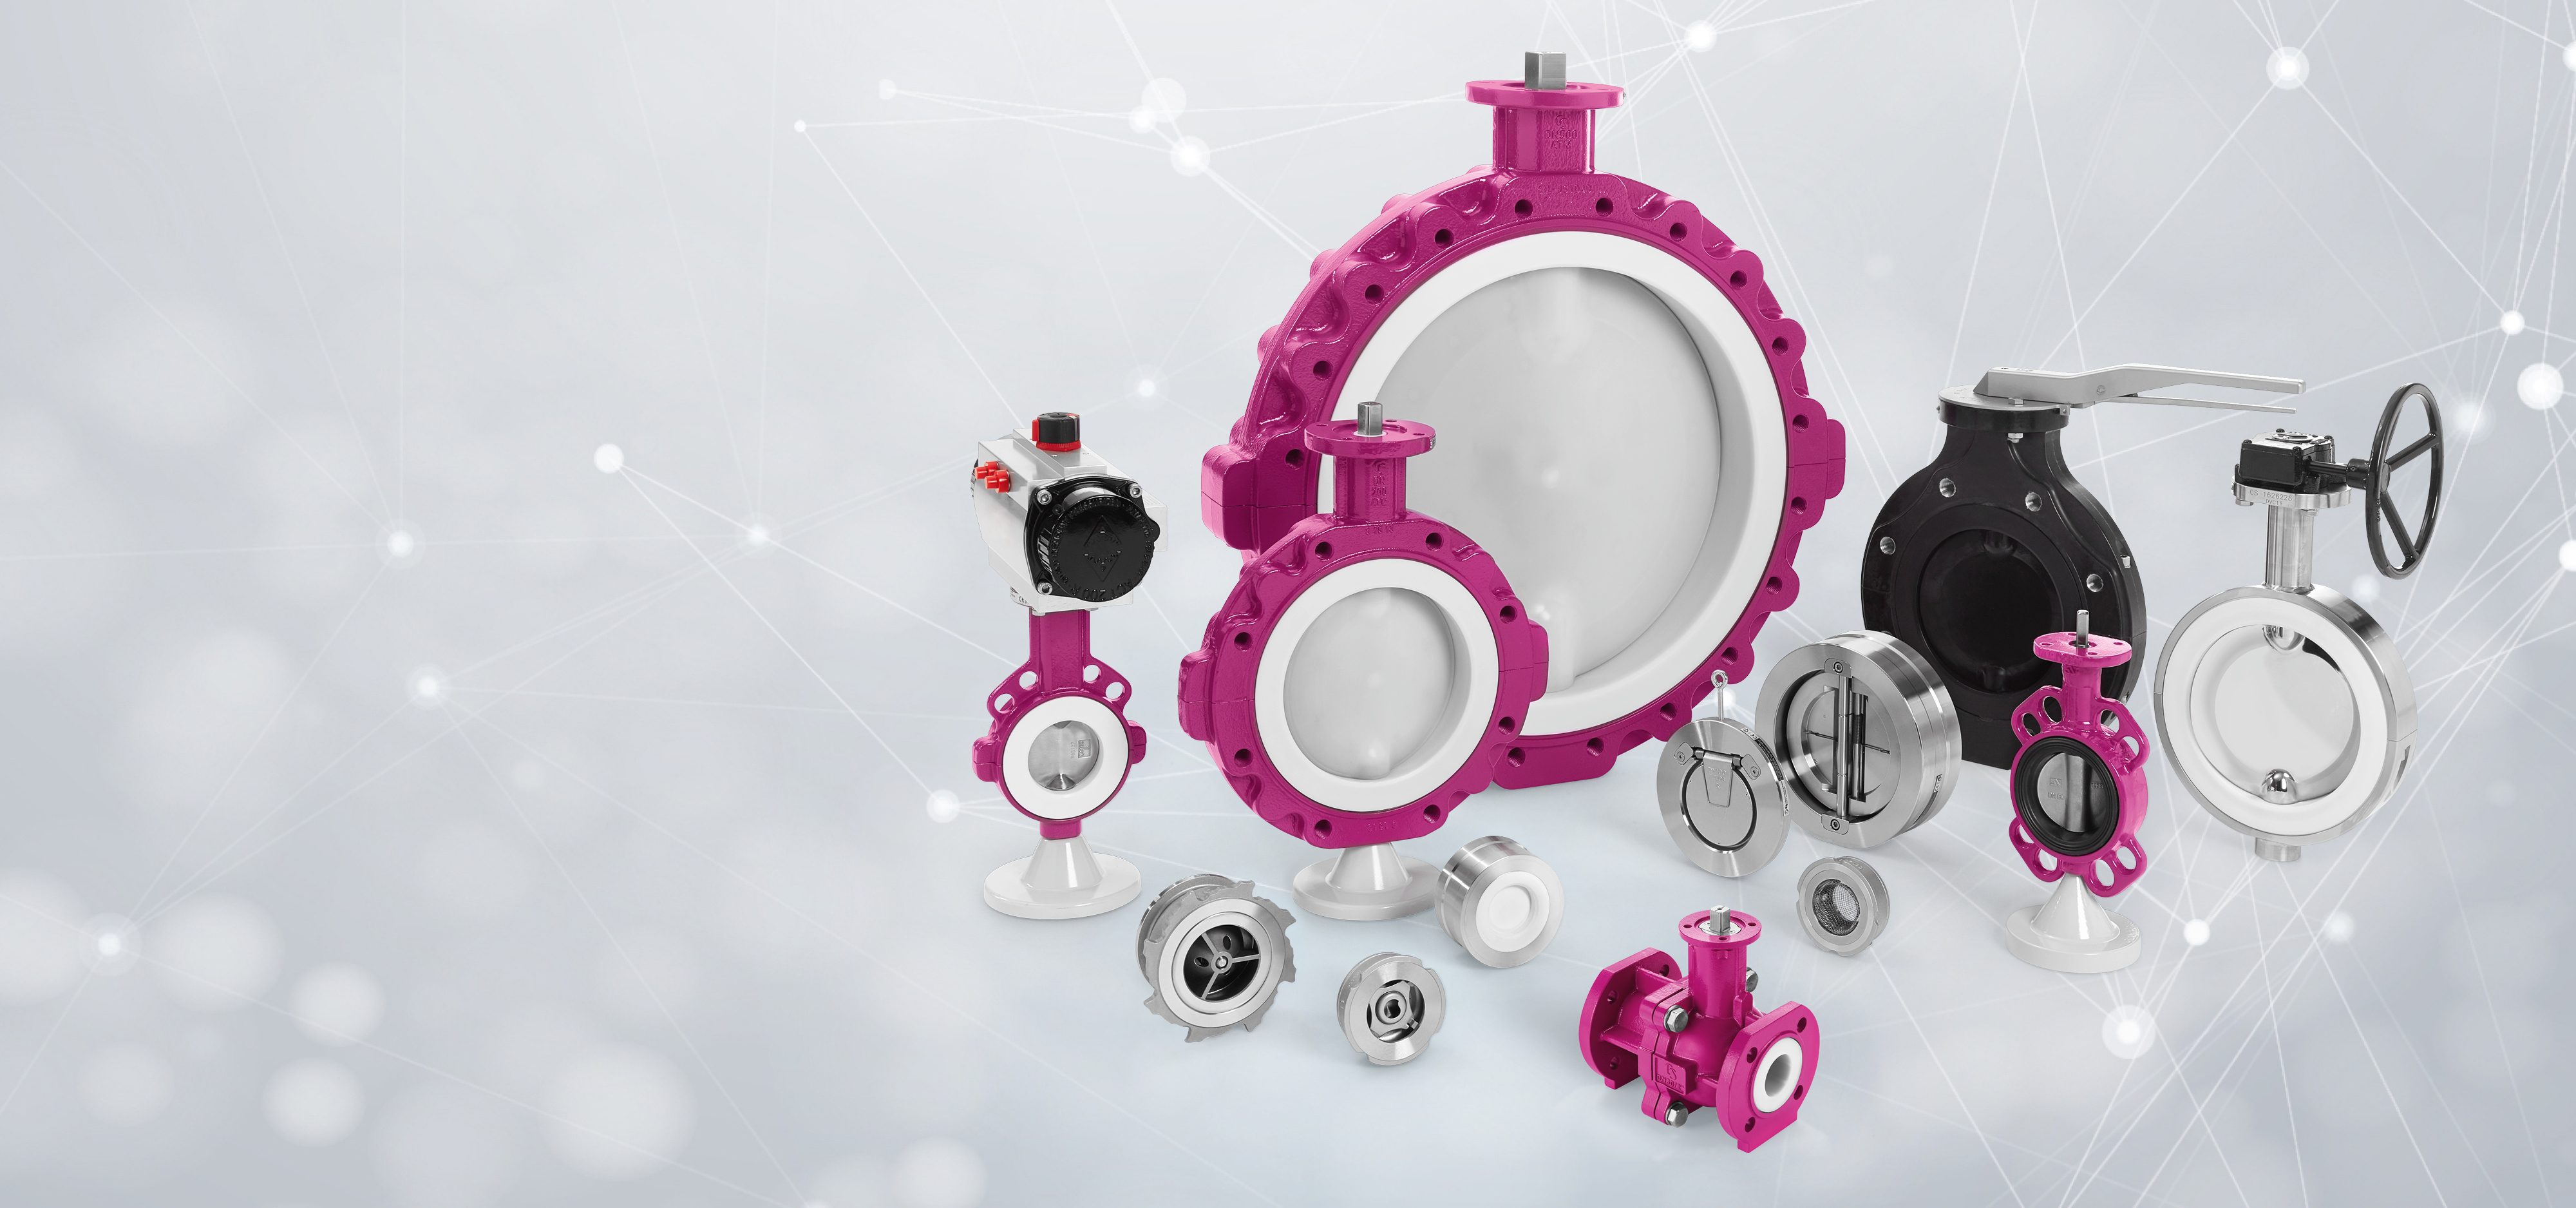 PTFE LINED VALVES AND CHECK VALVES